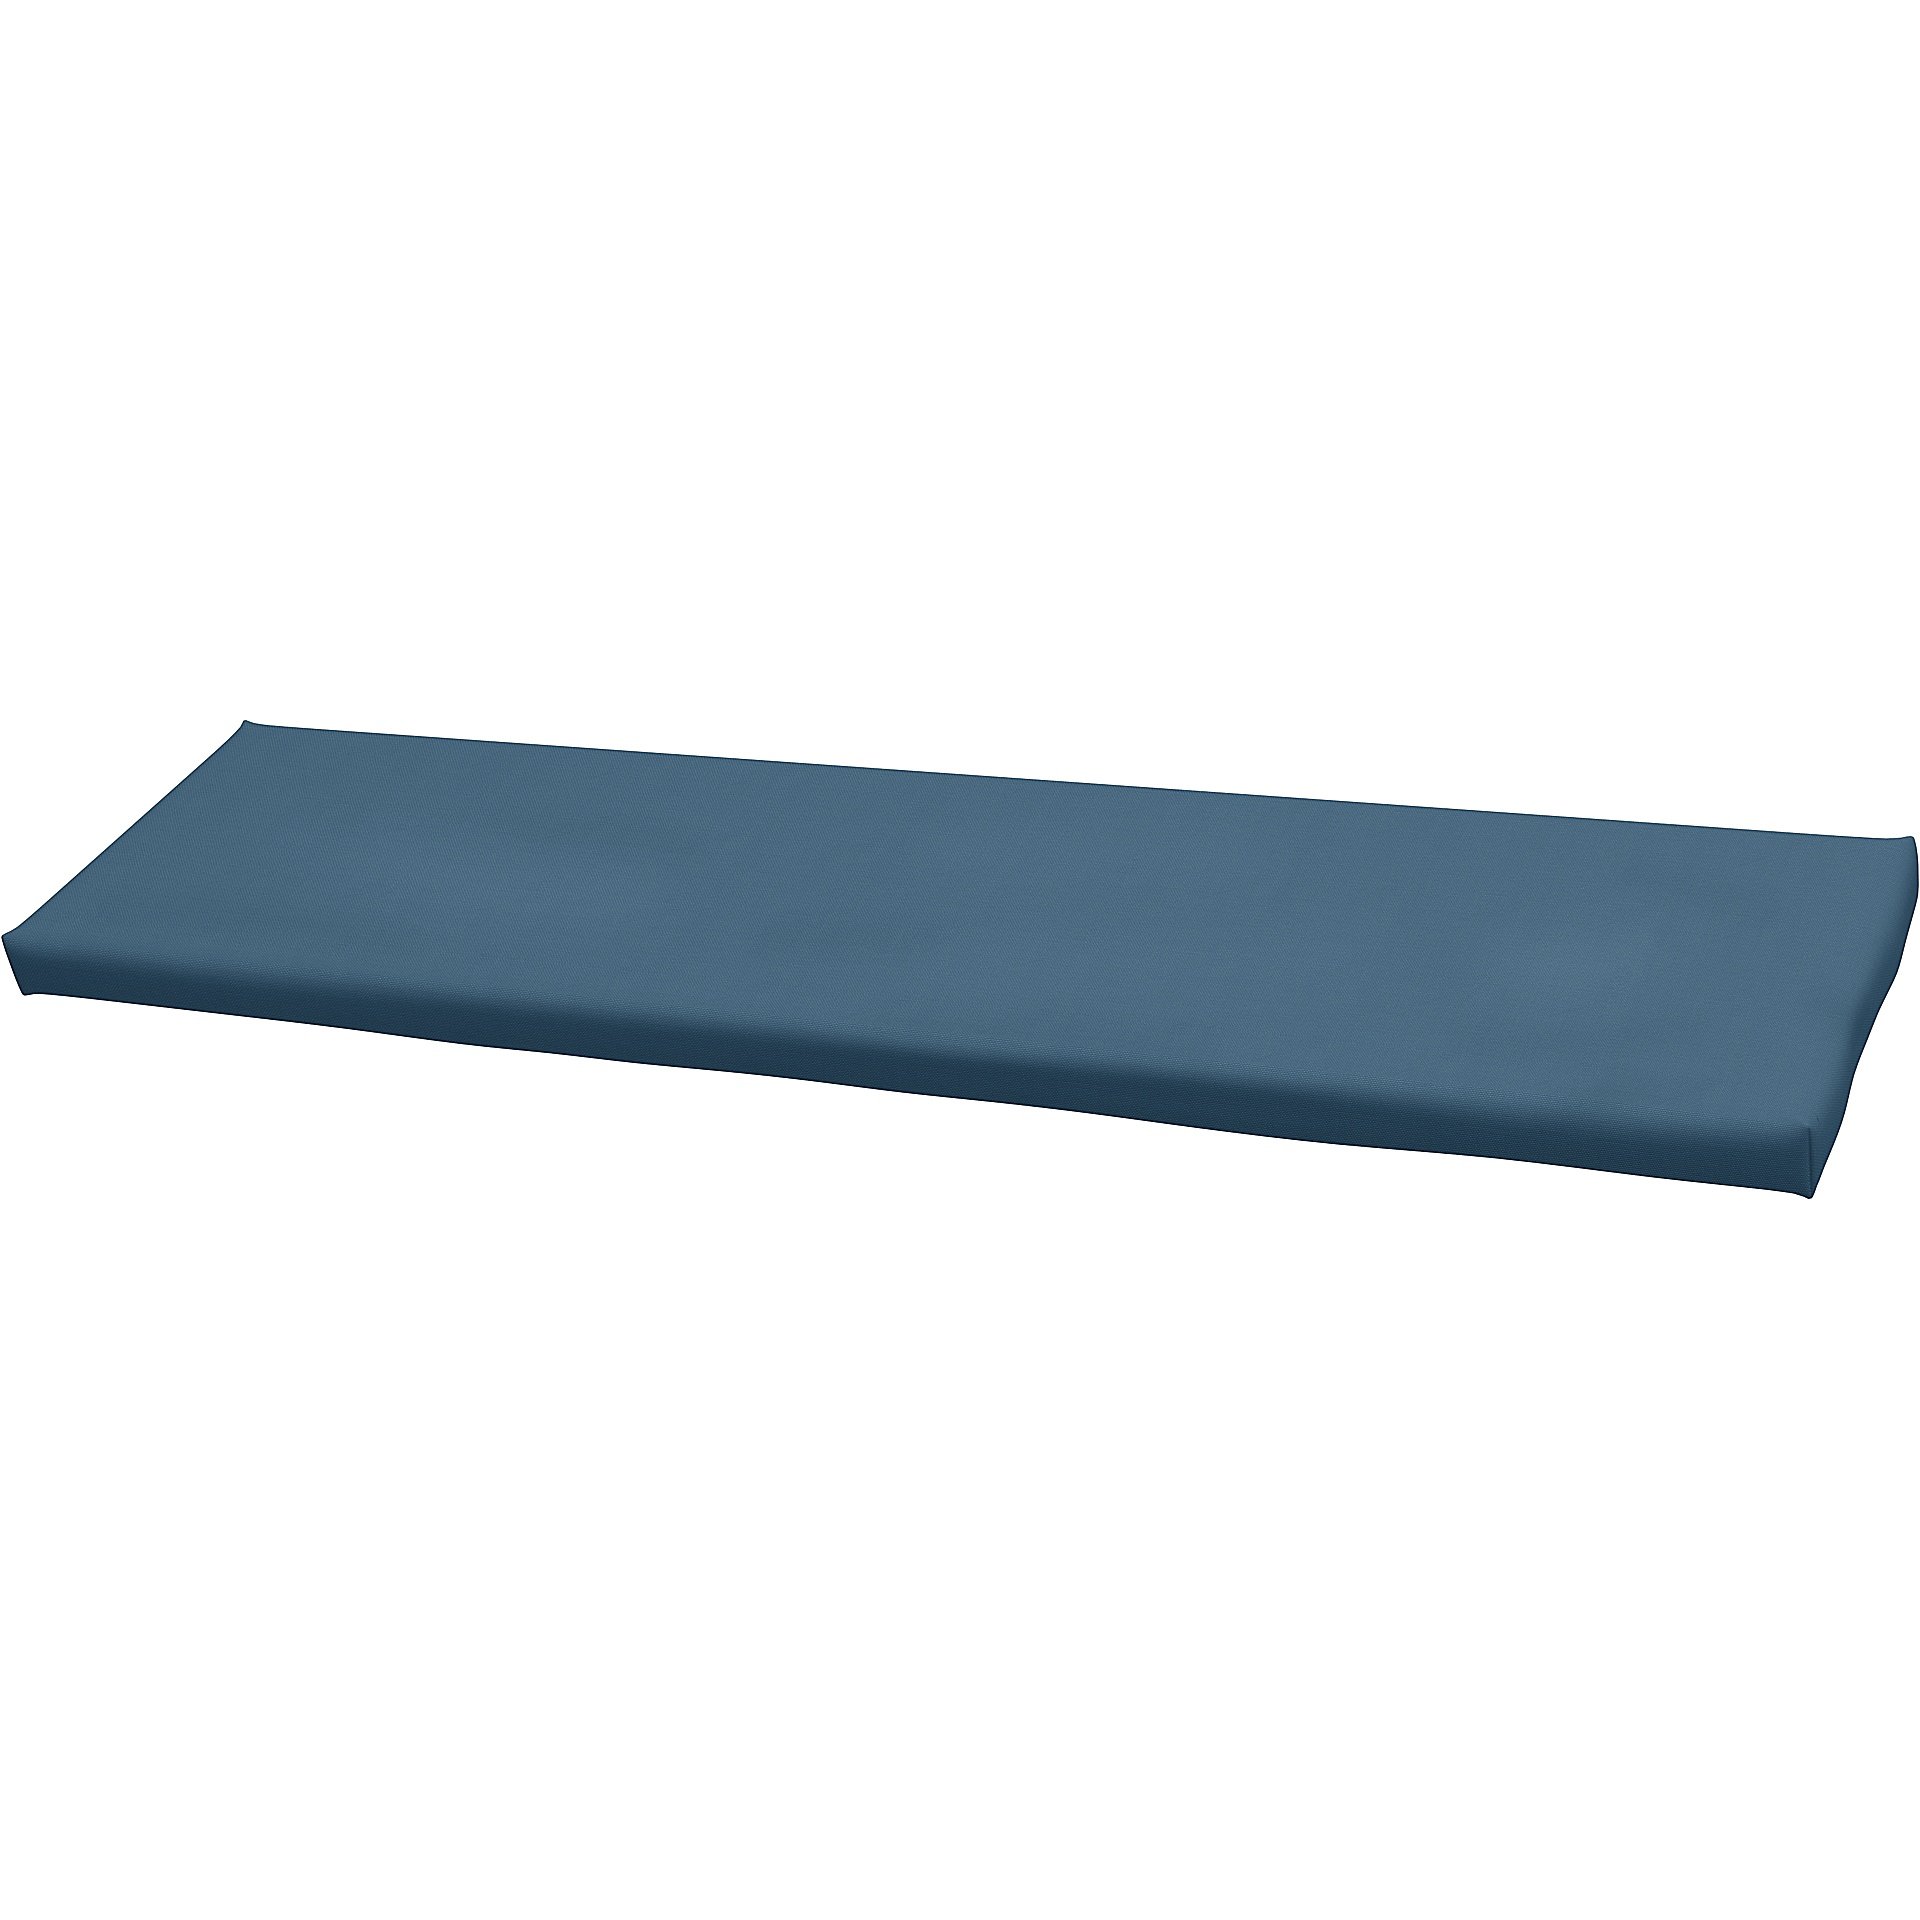 IKEA - Universal bench cushion cover 120x35x3,5 cm, Real Teal, Cotton - Bemz